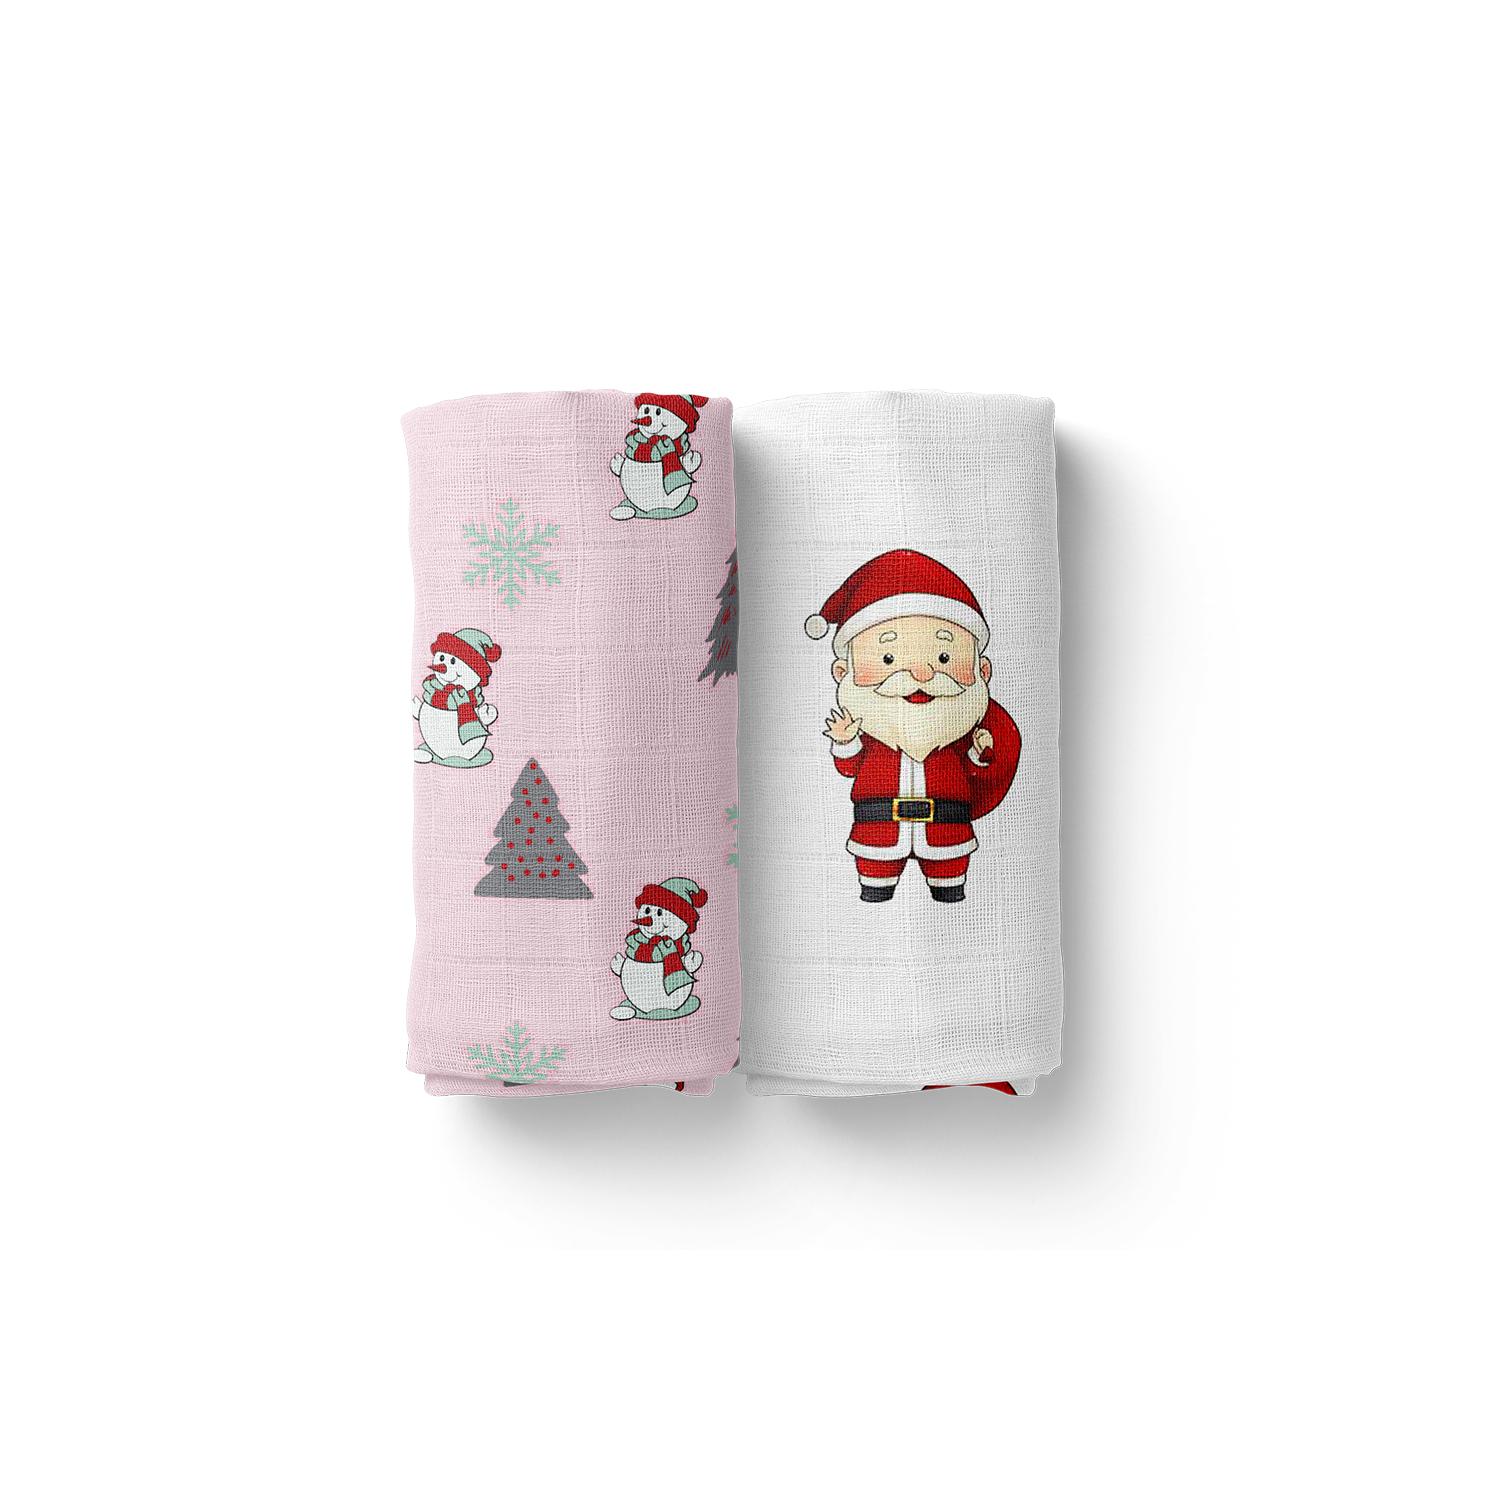 Baby Muslin Swaddle - 100x100 cm  - Pack of 2 - Santa and Snowman